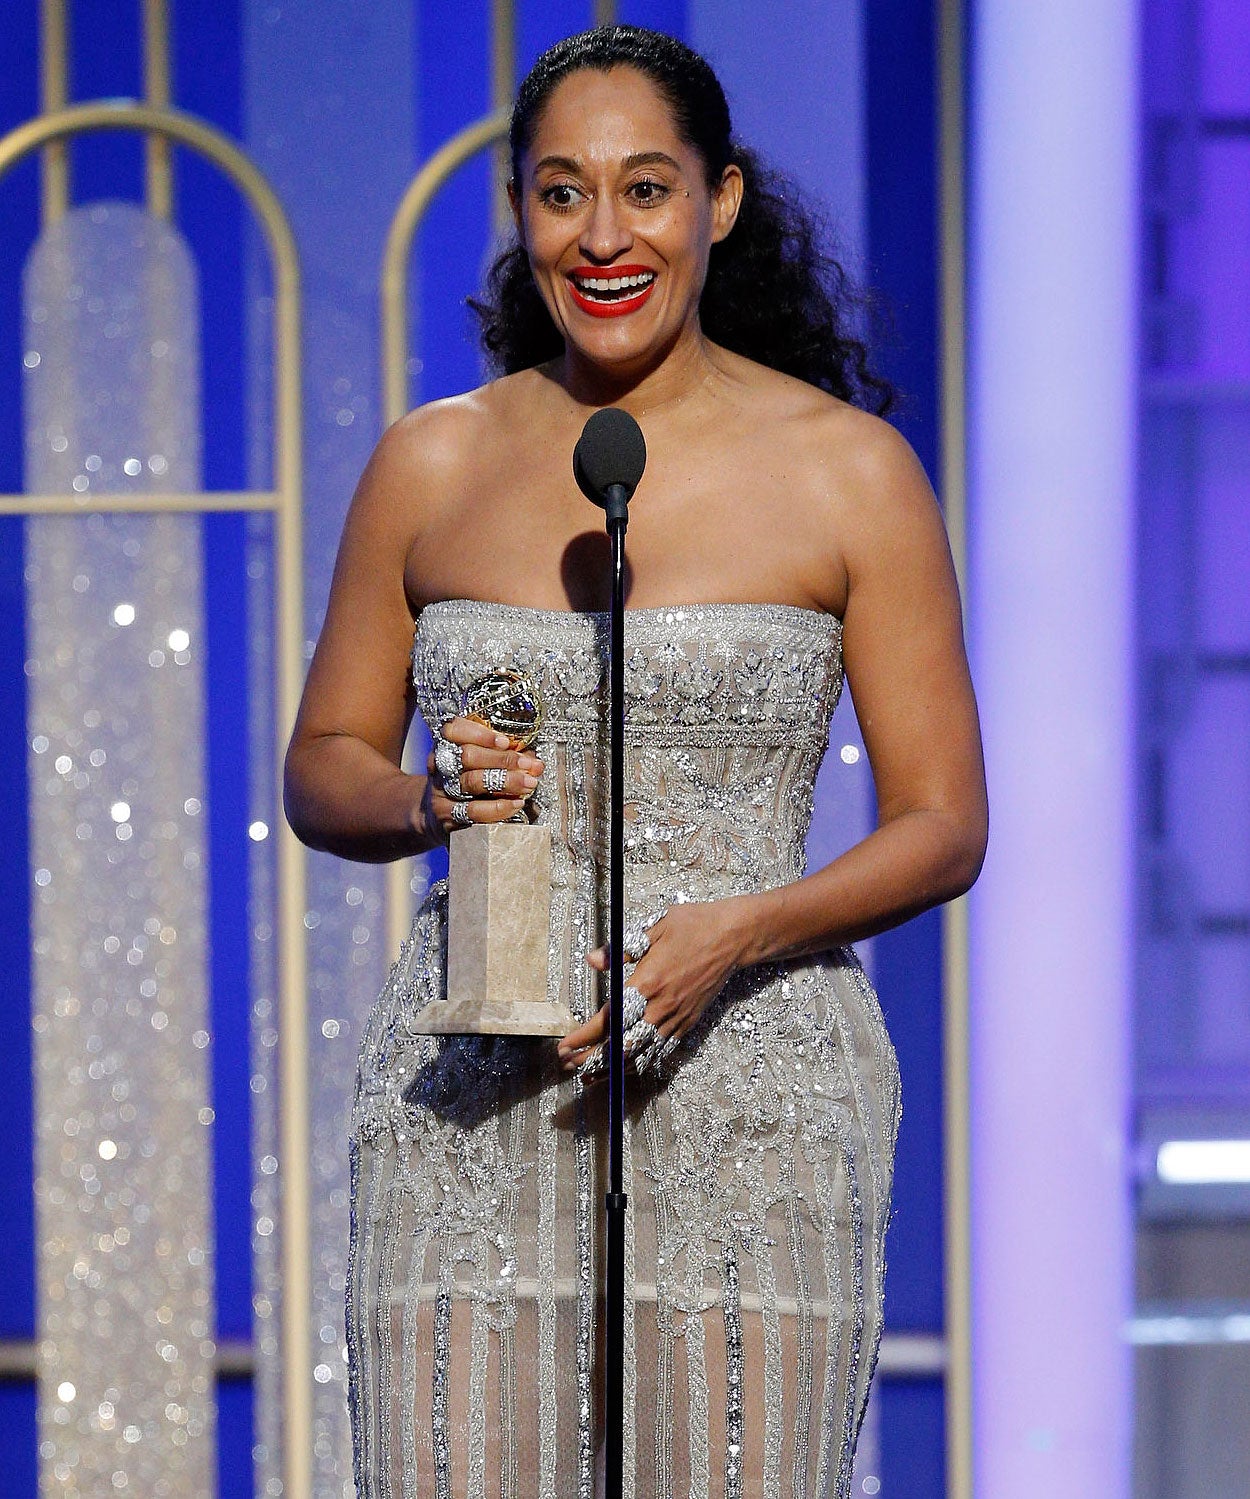 Tracee Ellis Ross on How She Really Uses Her Golden Globe Award: 'I Have Pounded Chicken with It'
